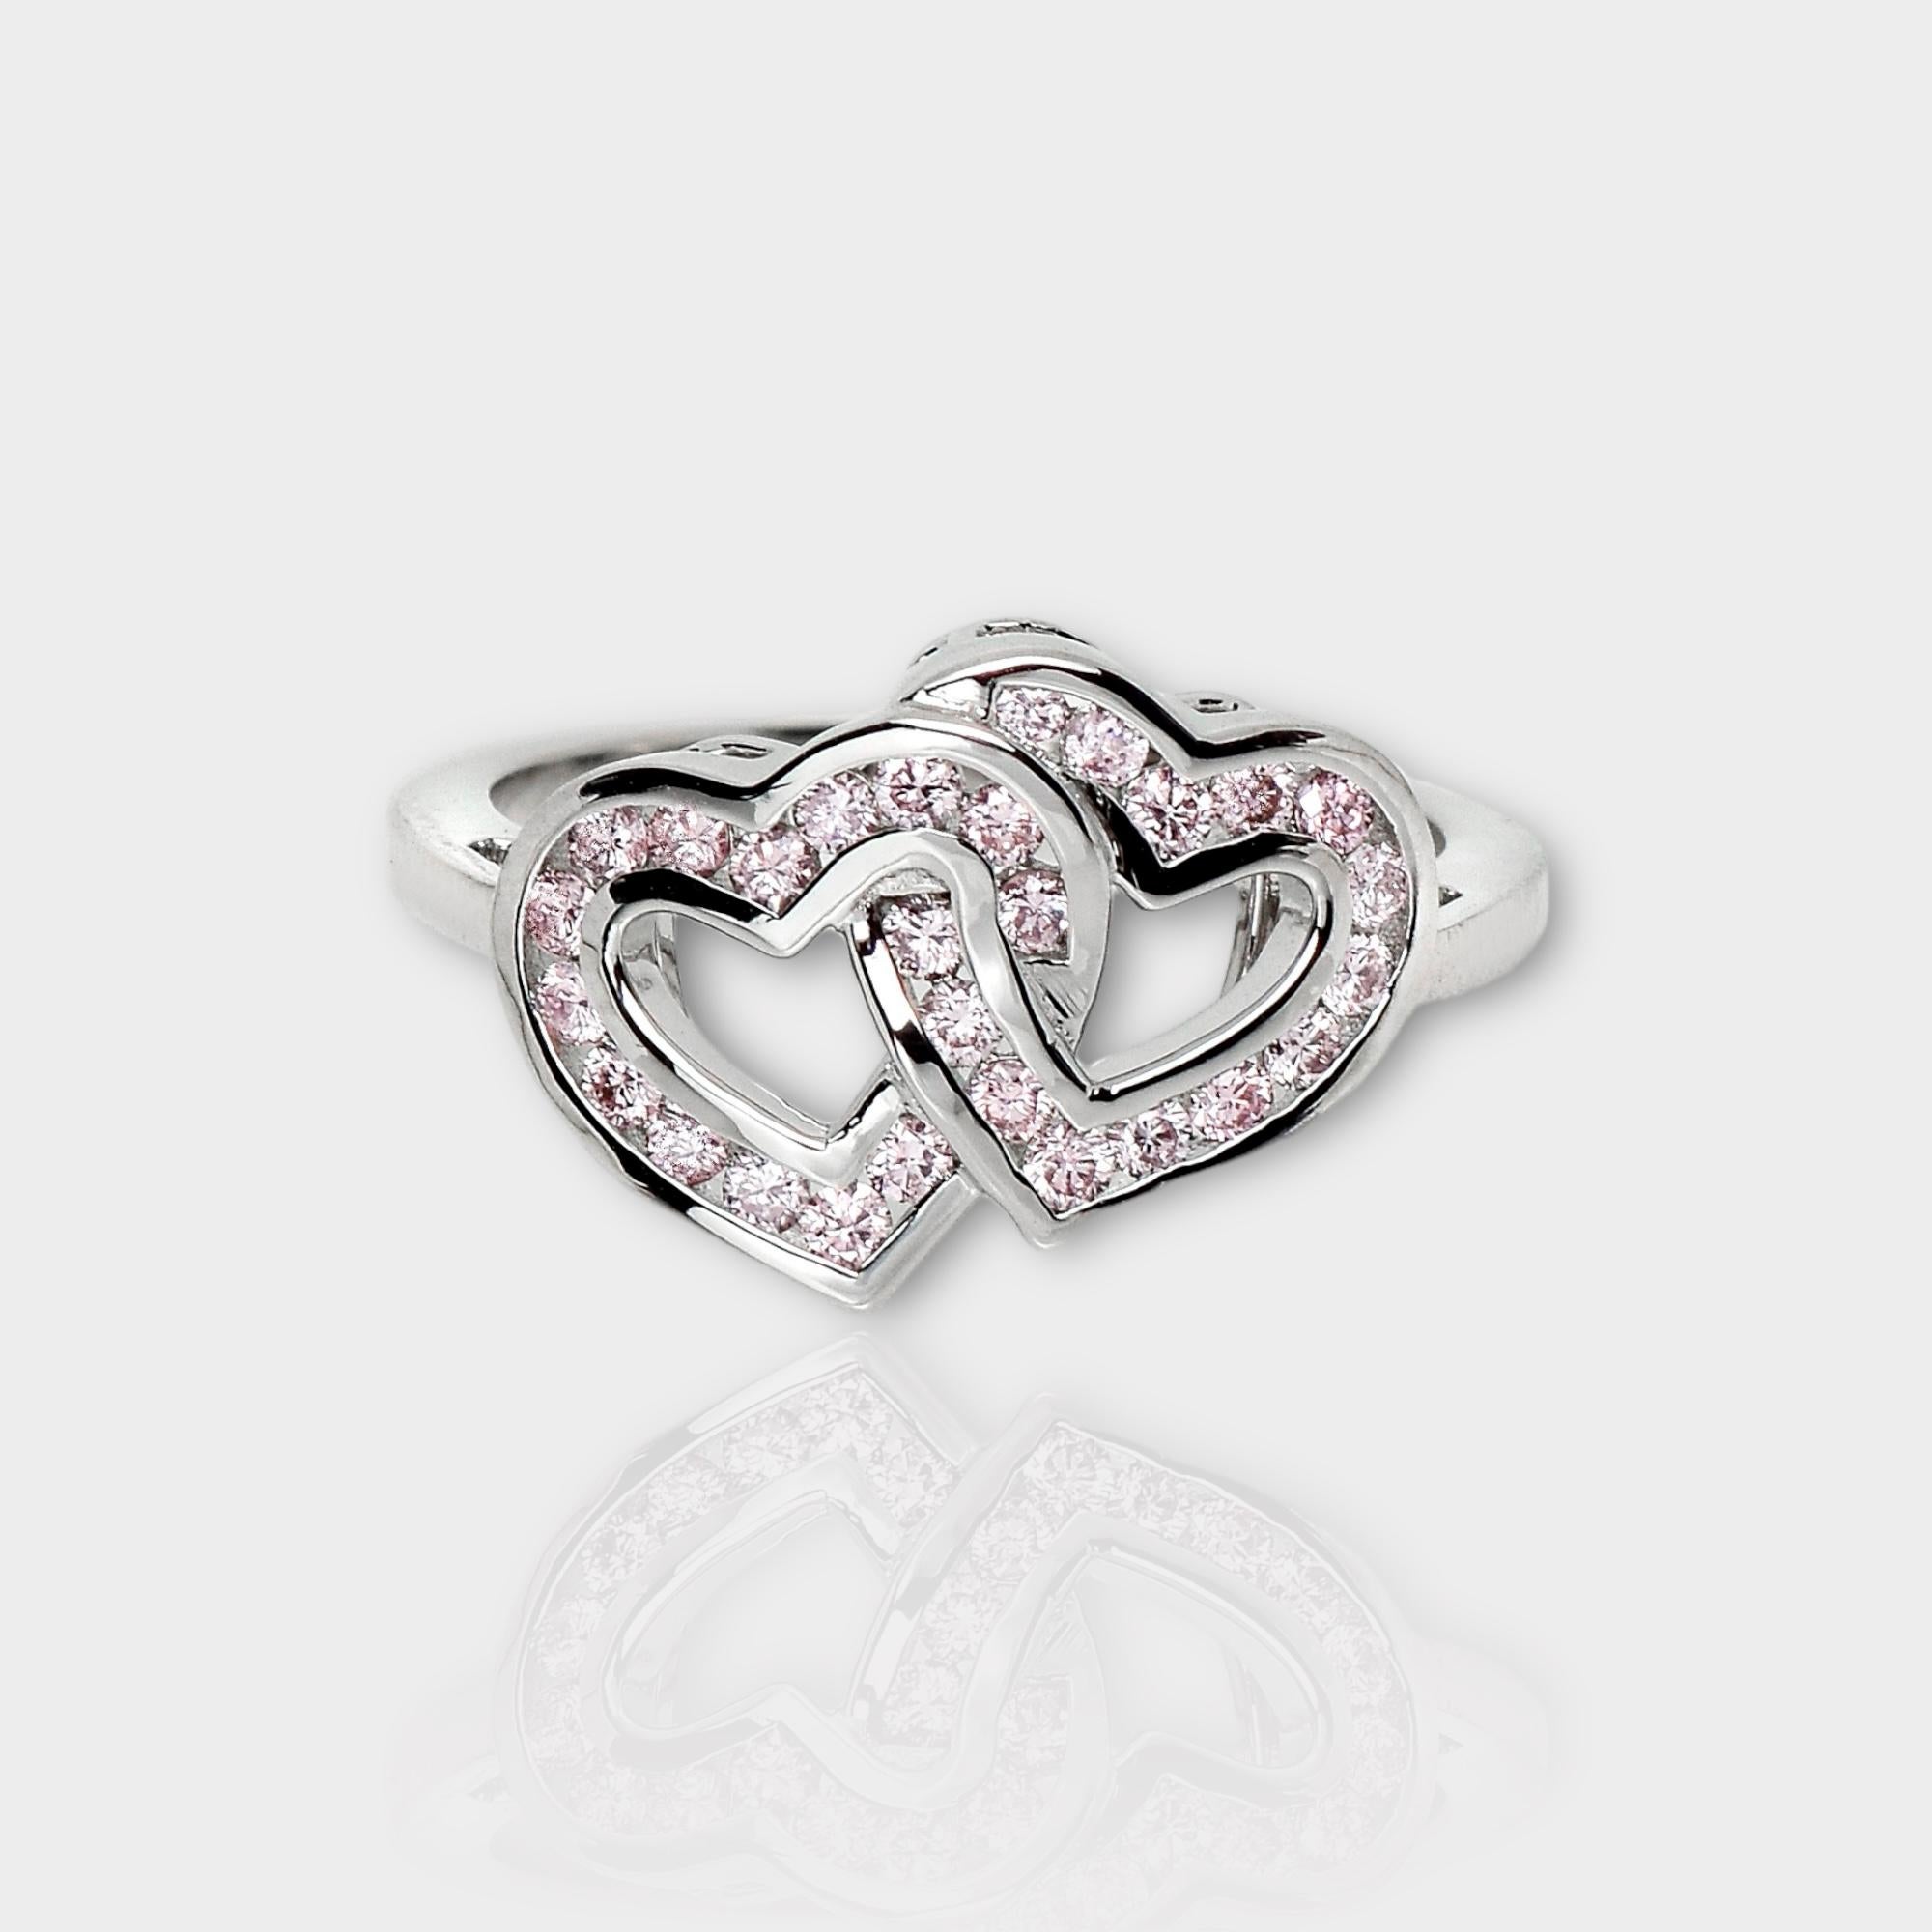 *IGI 14K 0.41 ct Natural Pink Diamonds Cross Heart Design  Antique Art Deco Ring*

This band features a stunning design with a cross heart crafted from 14K white gold. It is set with natural pink diamonds weighing 0.41 carats.

This ring features